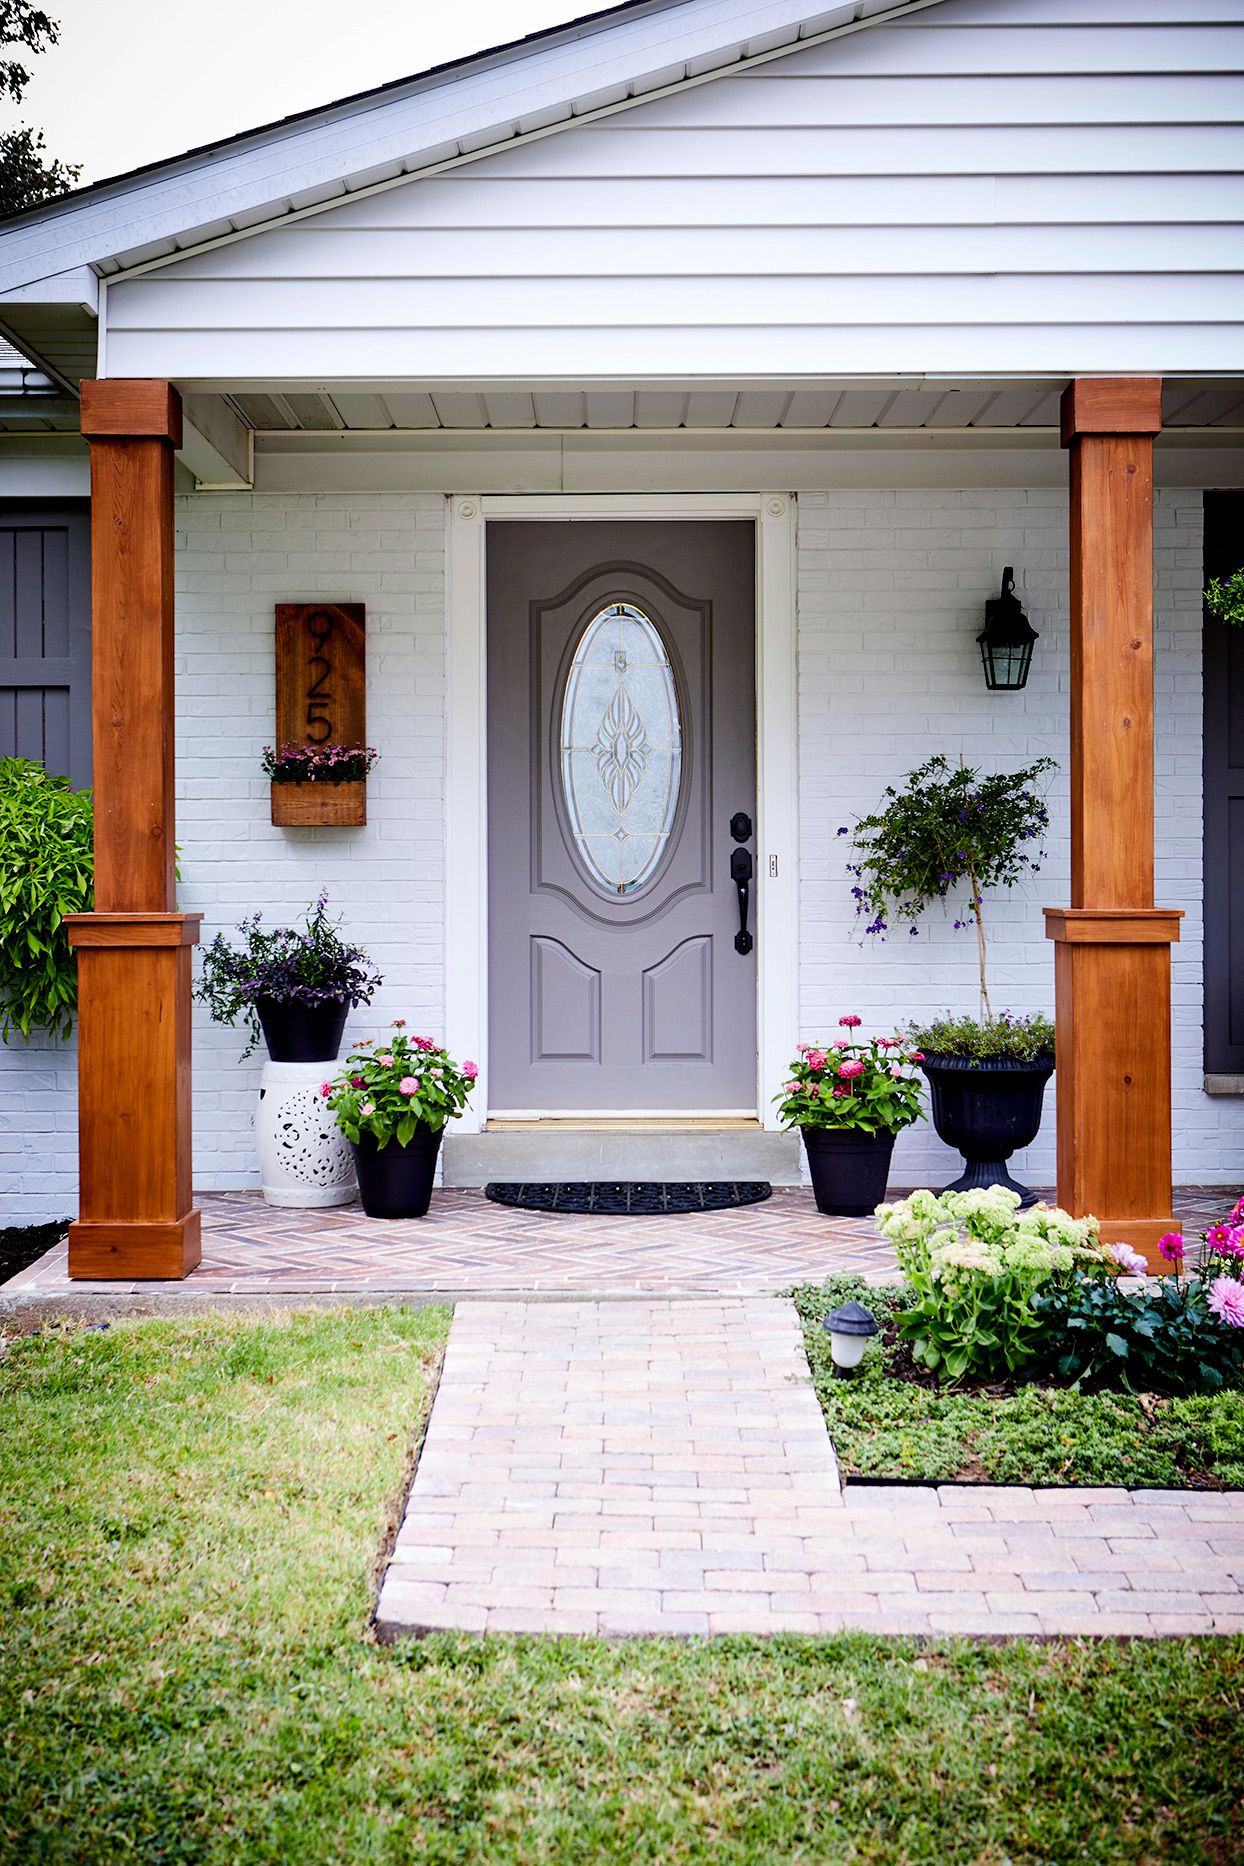 Enhance your mailbox area with these landscaping ideas